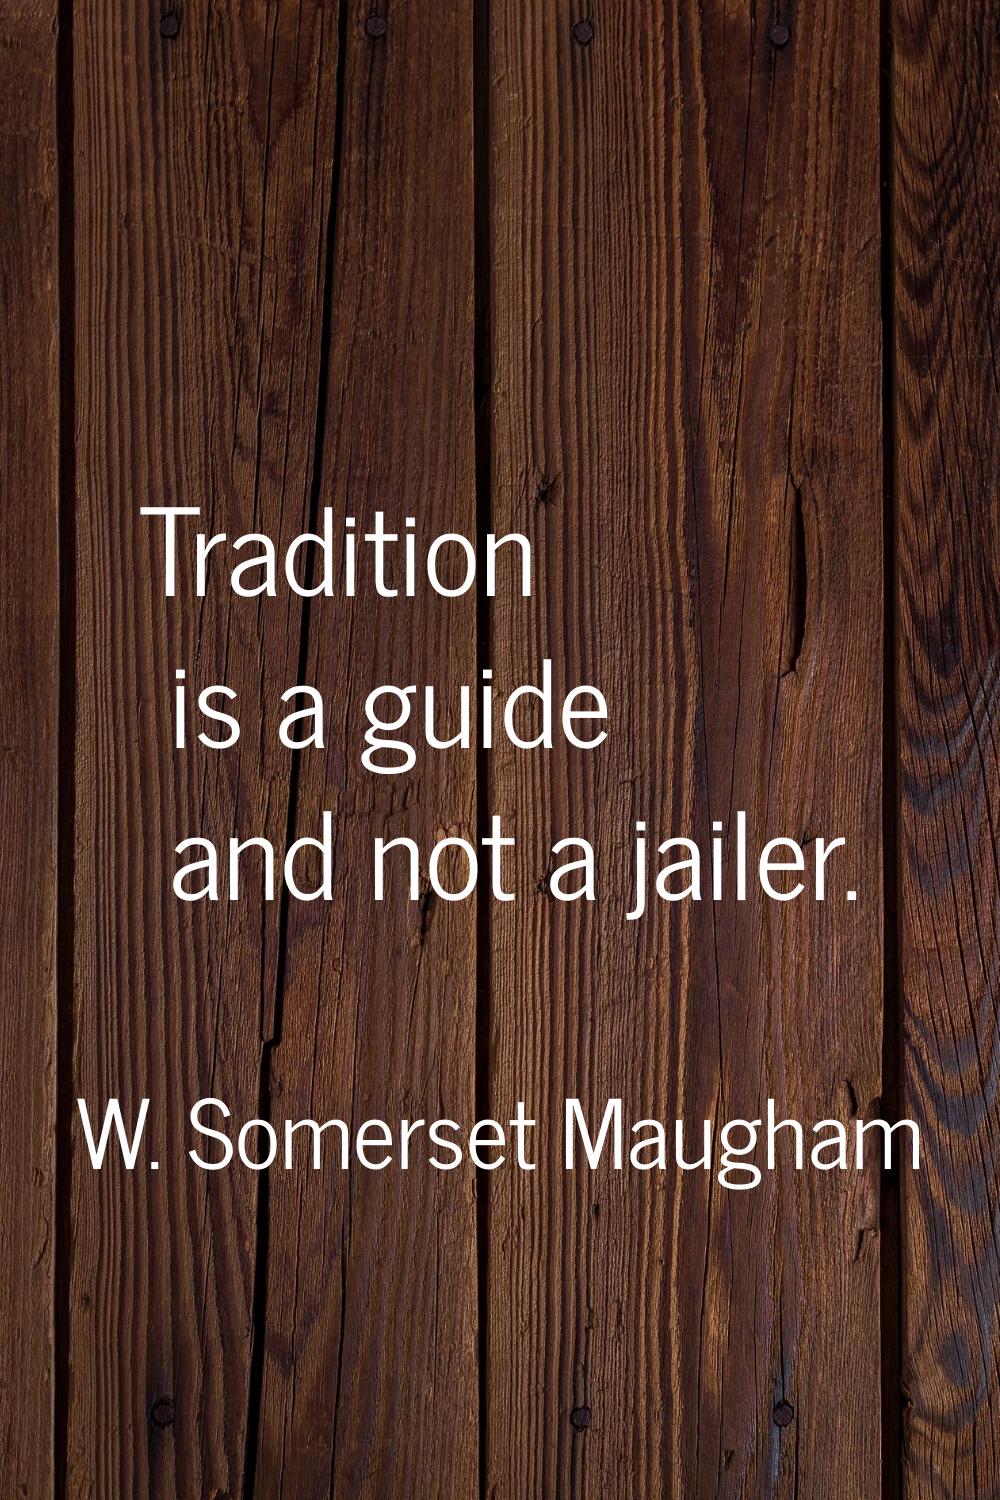 Tradition is a guide and not a jailer.